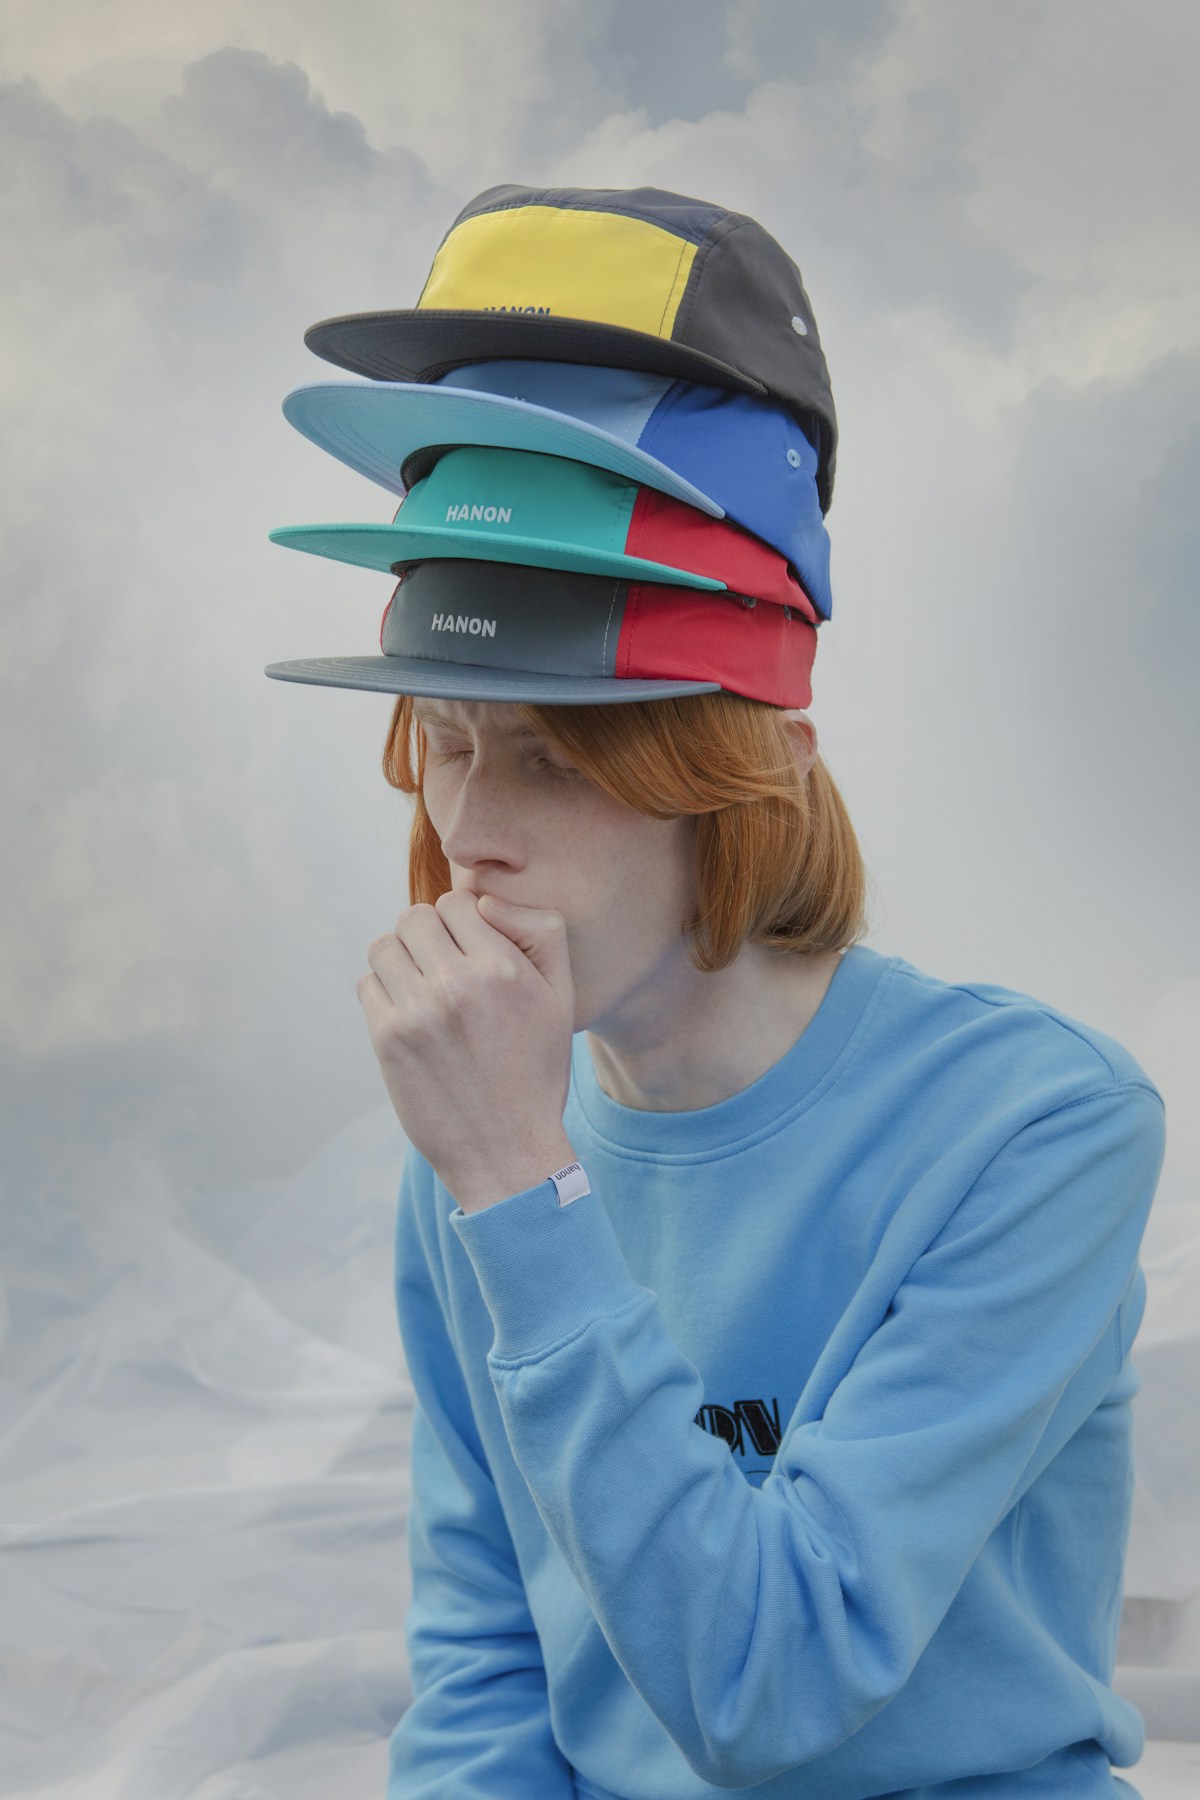 A model wearing four different coloured baseball caps on his head